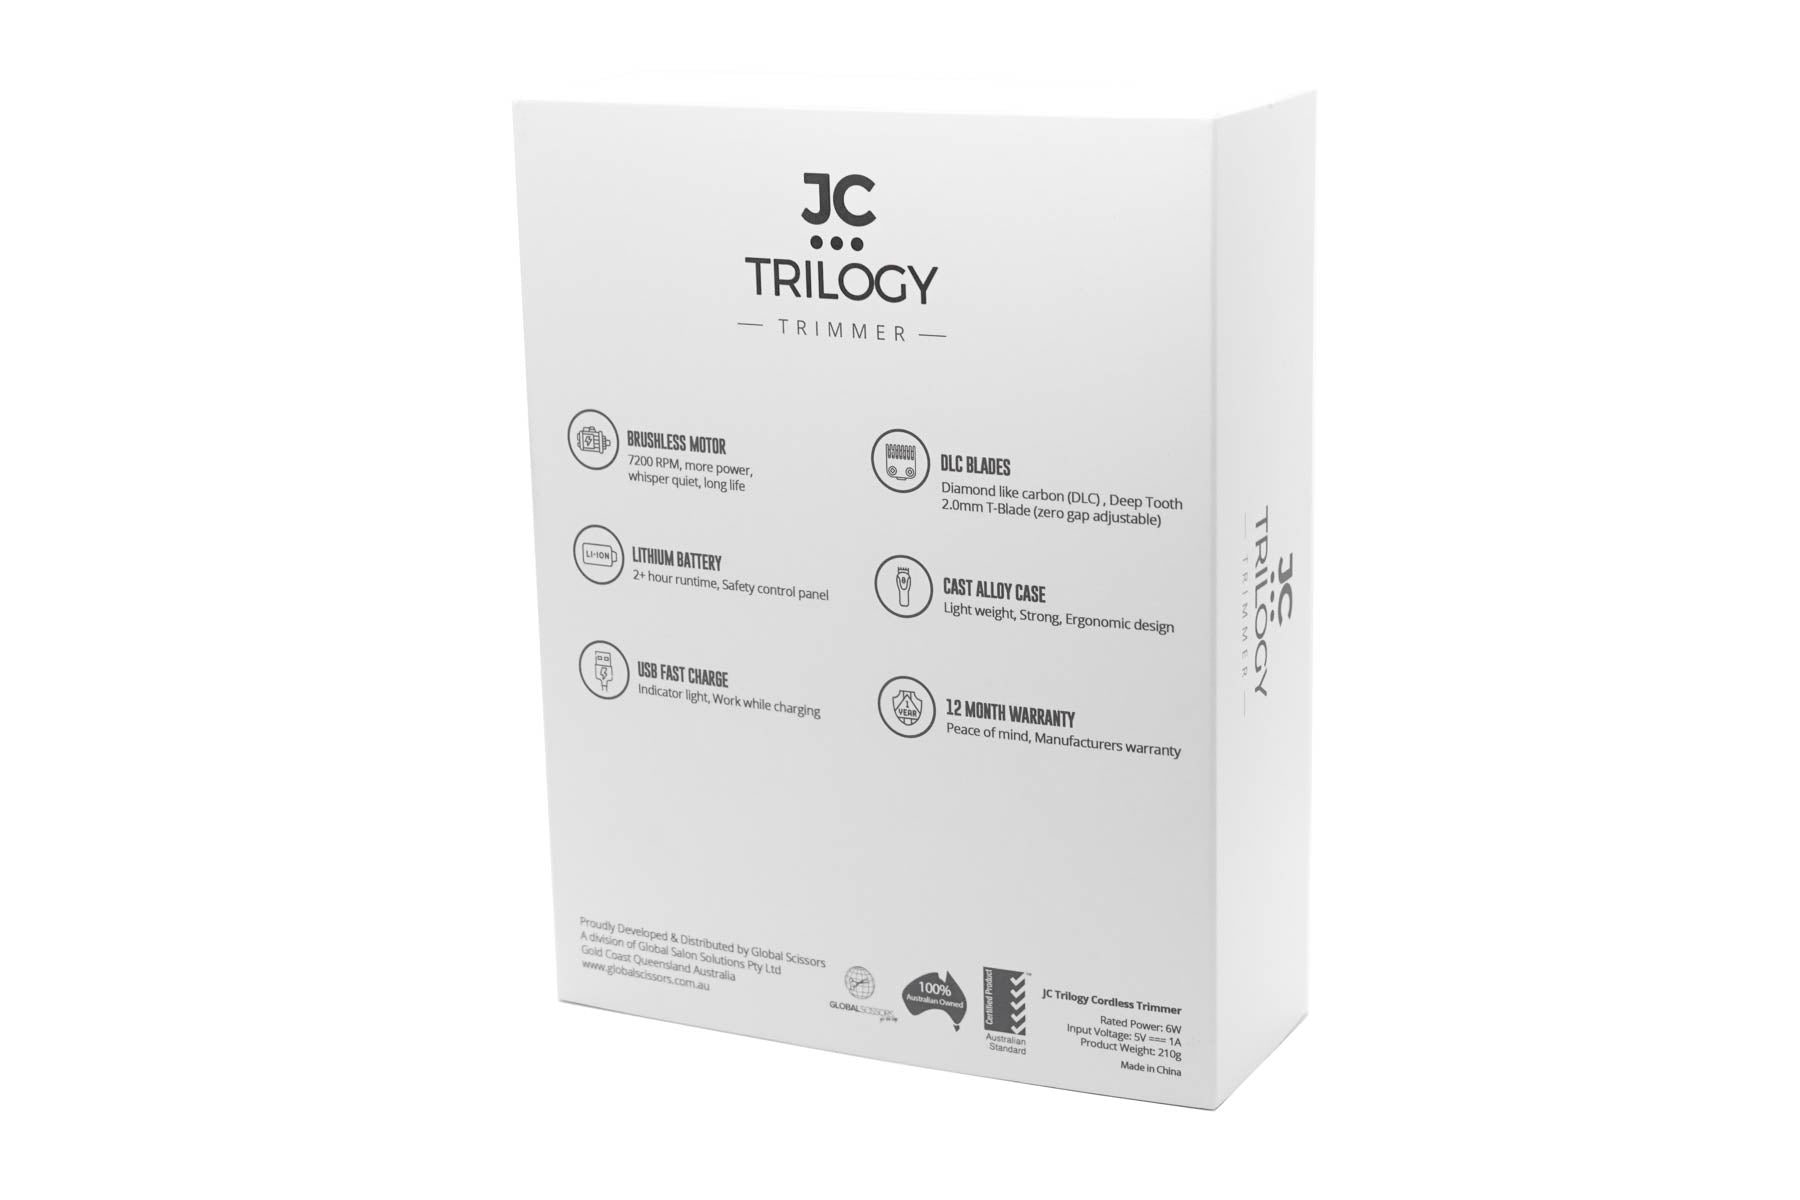 JC TRILOGY TRIMMER - Cordless Rechargeable 3+HR Runtime